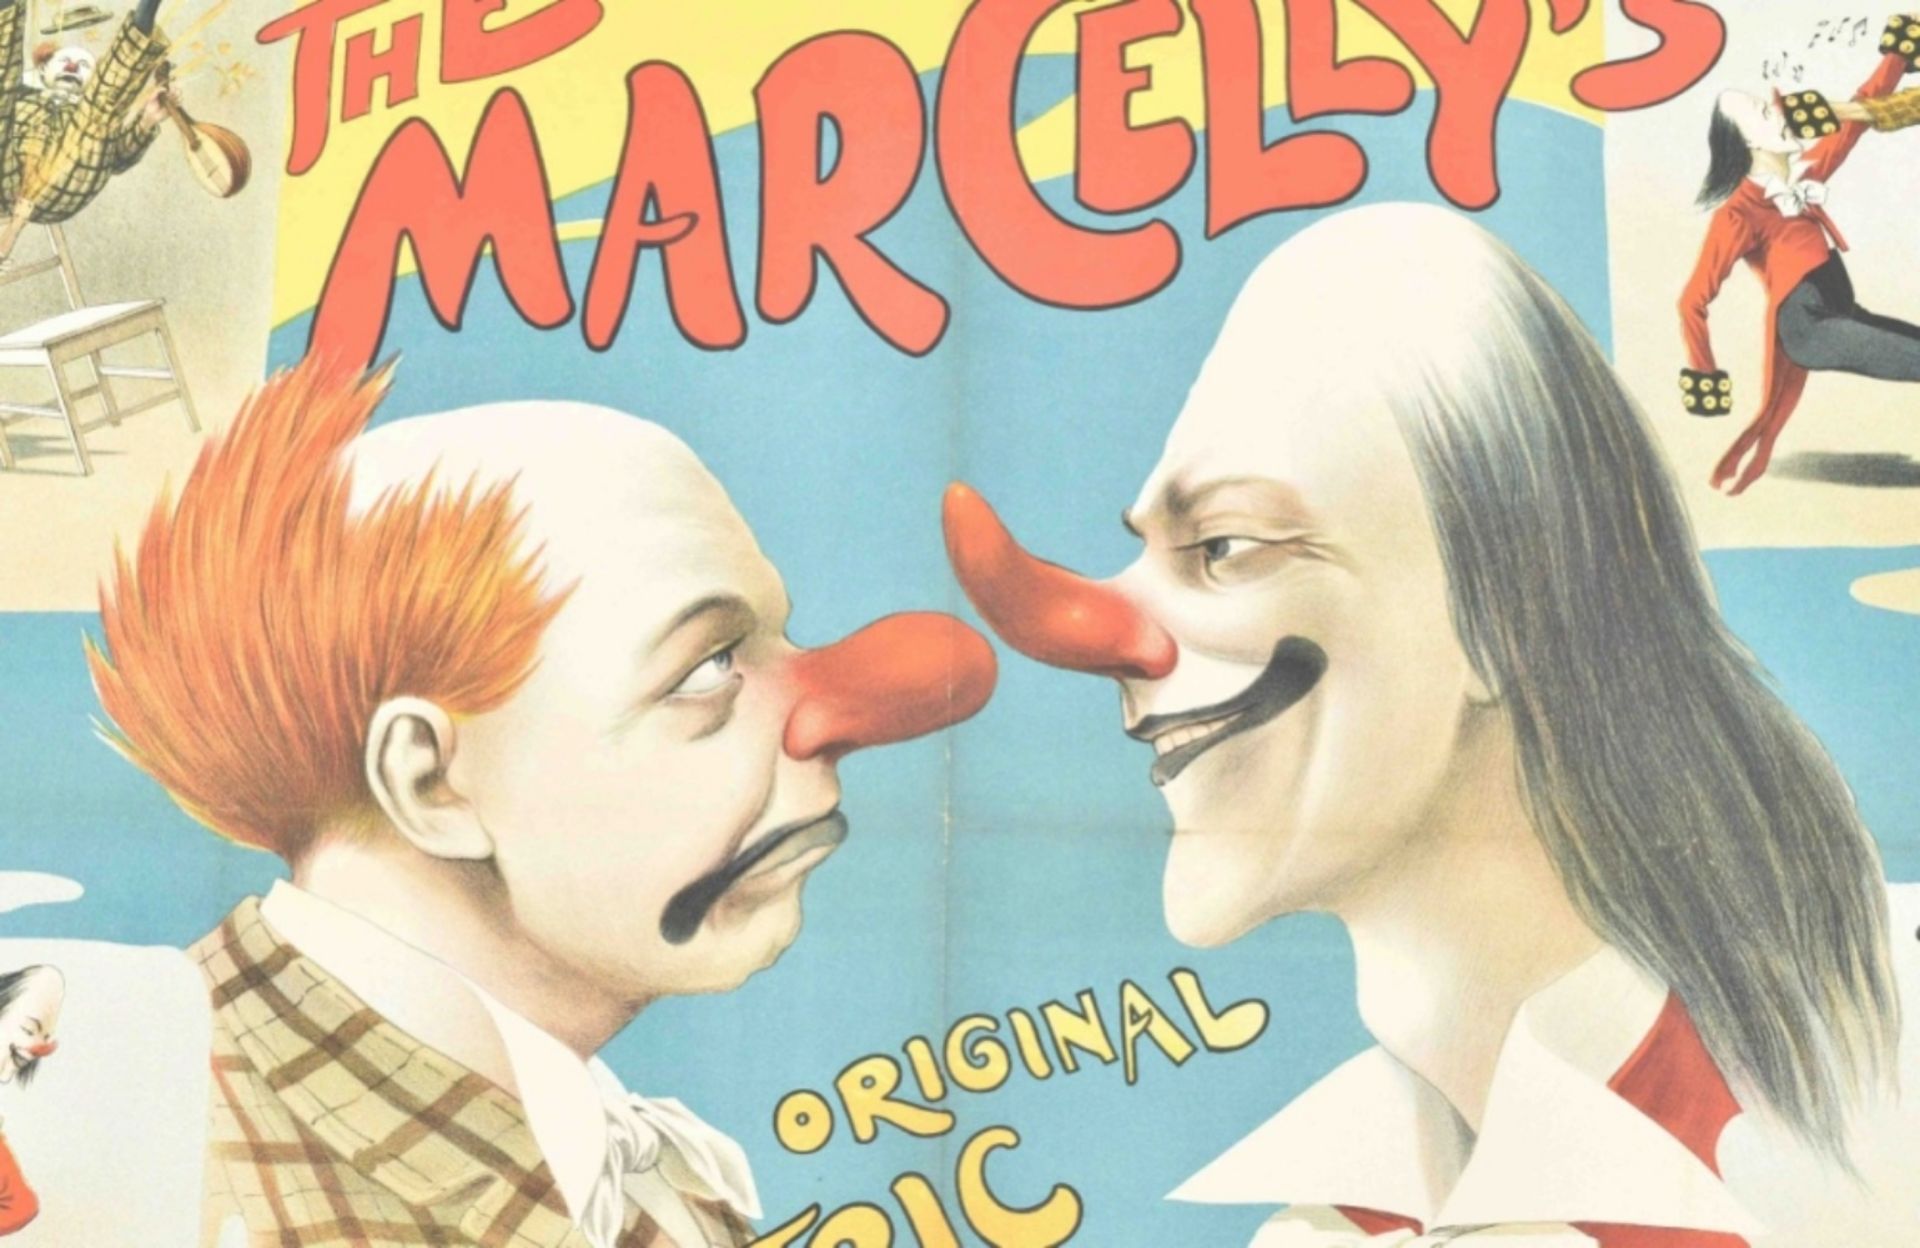 [Clowns] [Comedy] The Marcelly's, original excentric musical comedians Friedländer, Hamburg, 1900 - Image 4 of 4